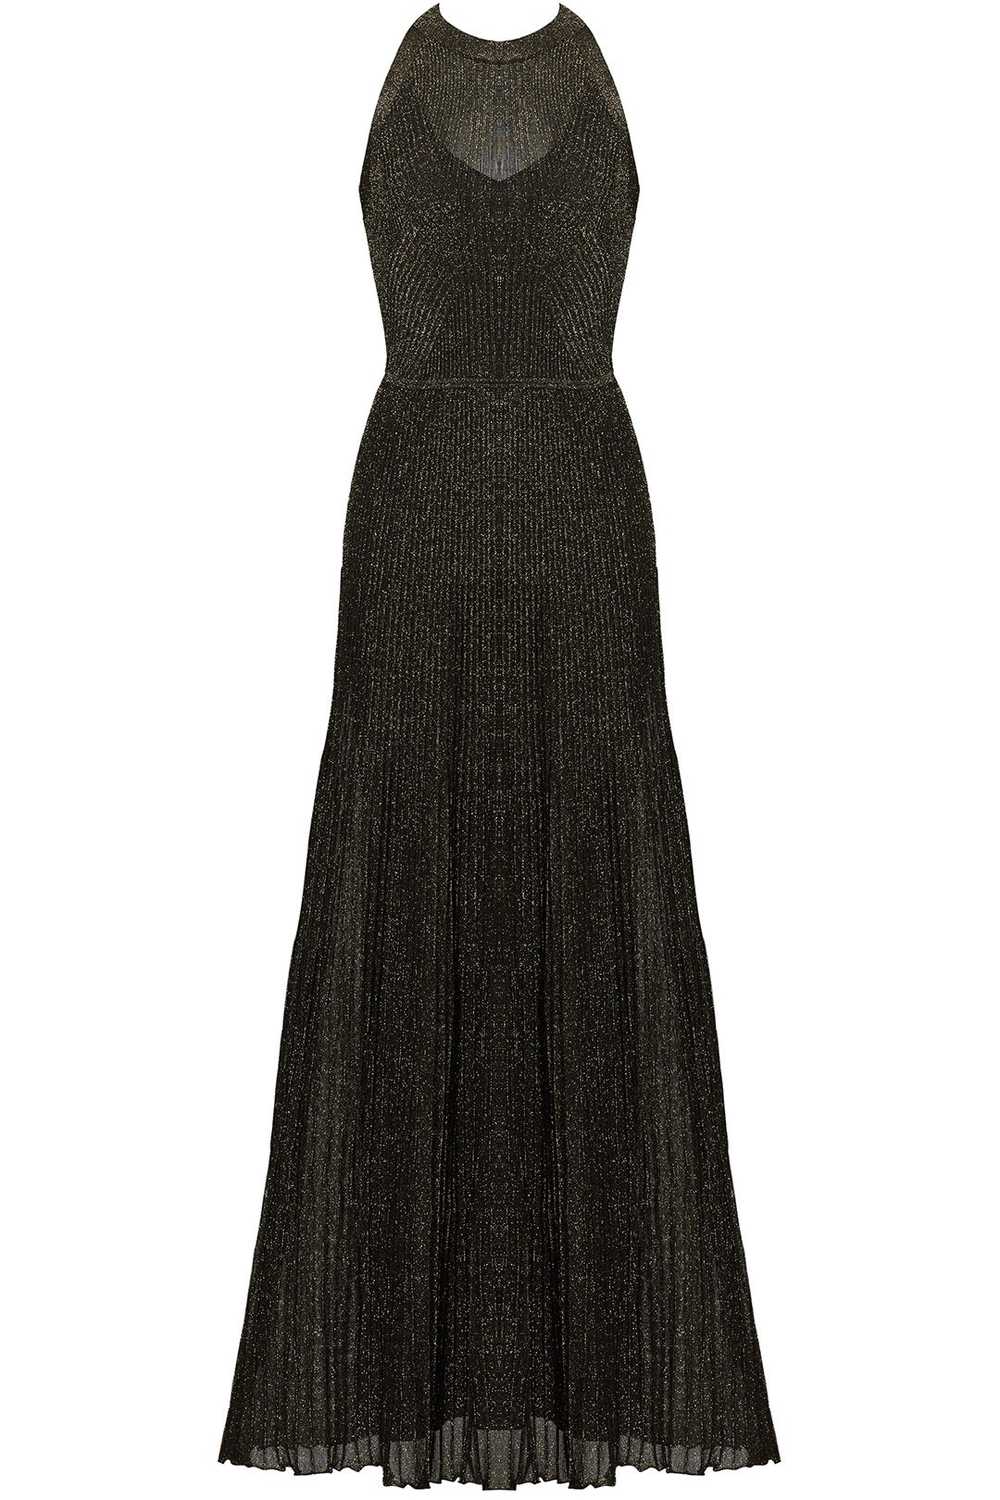 Vionnet Black and Gold Knit Gown - image 4